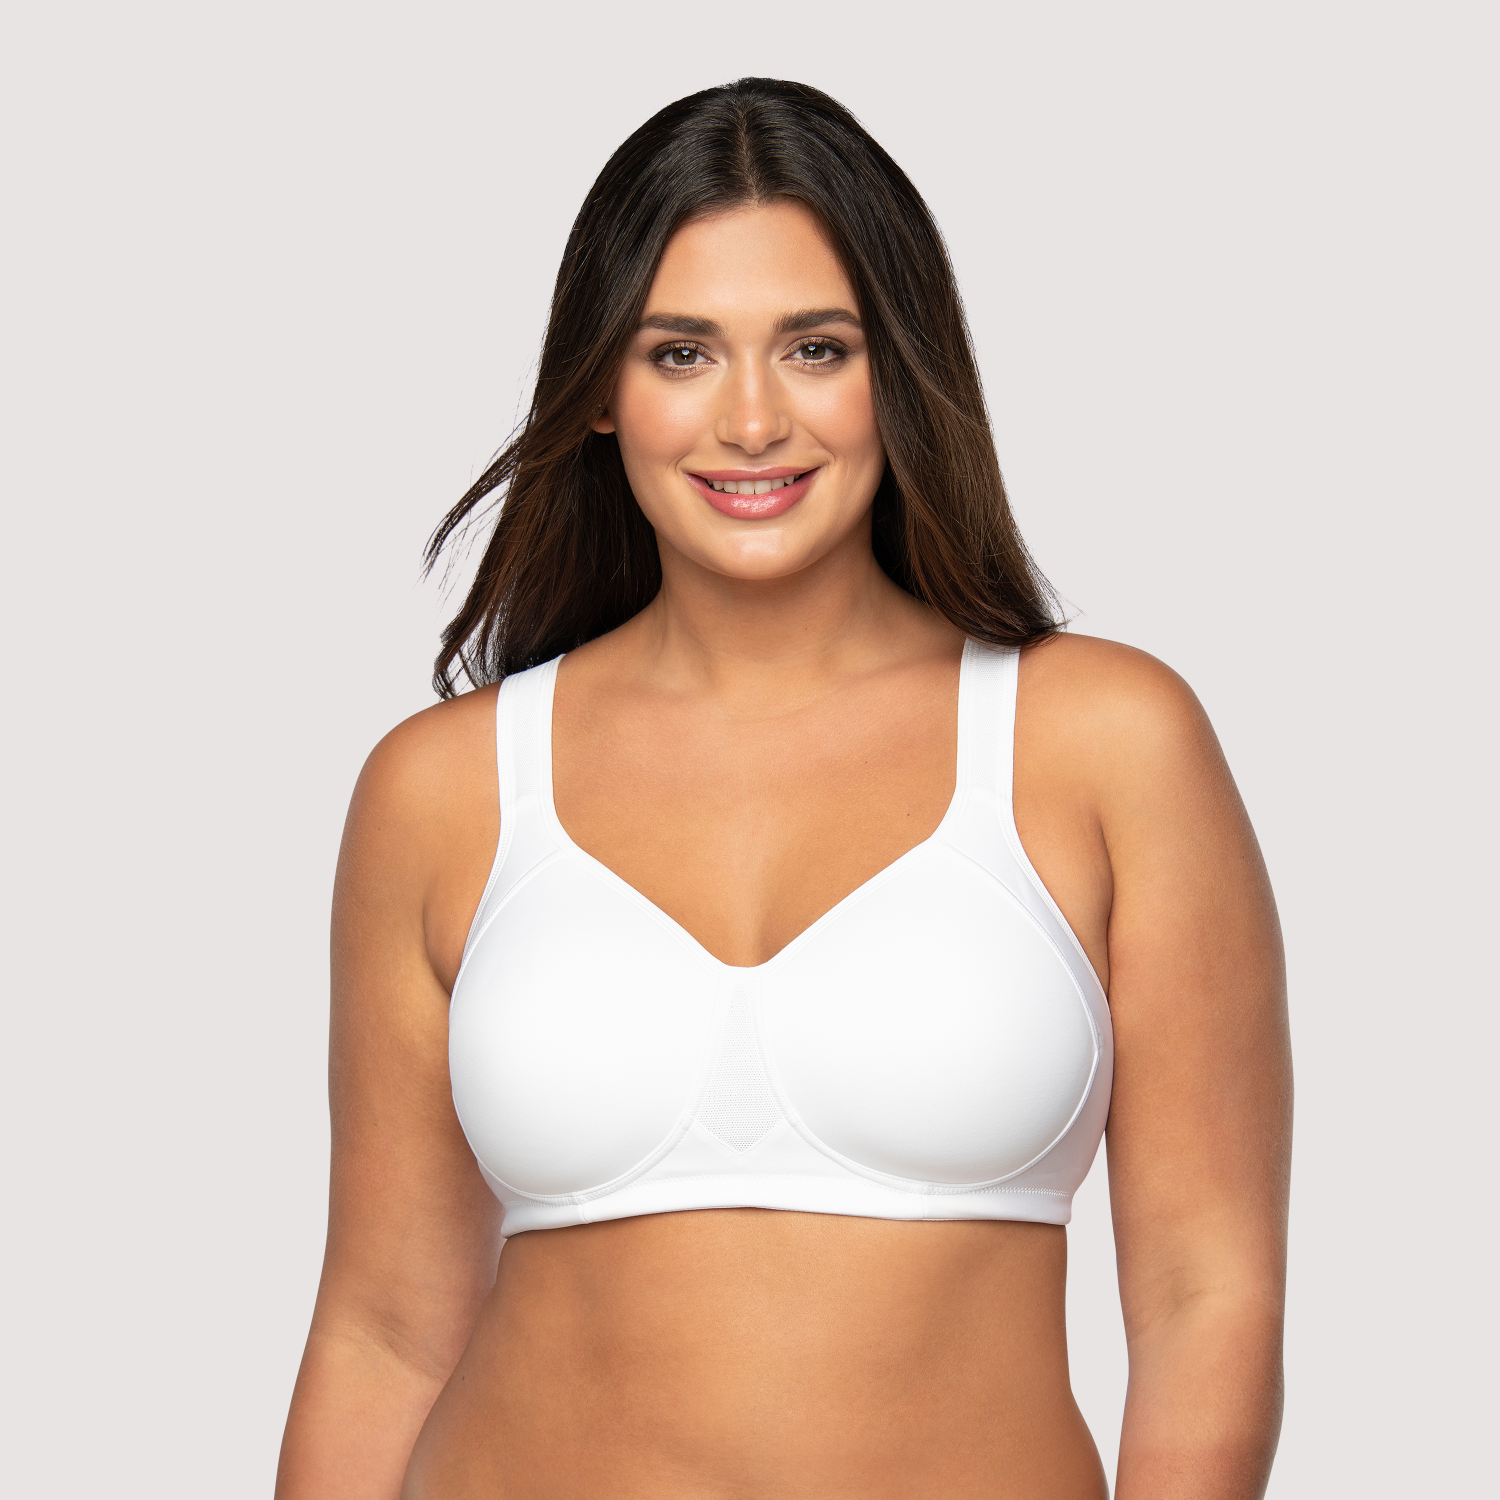 4 Tips to Make Sheer Plus Size Bras Work (Yes, Even Above a D Cup